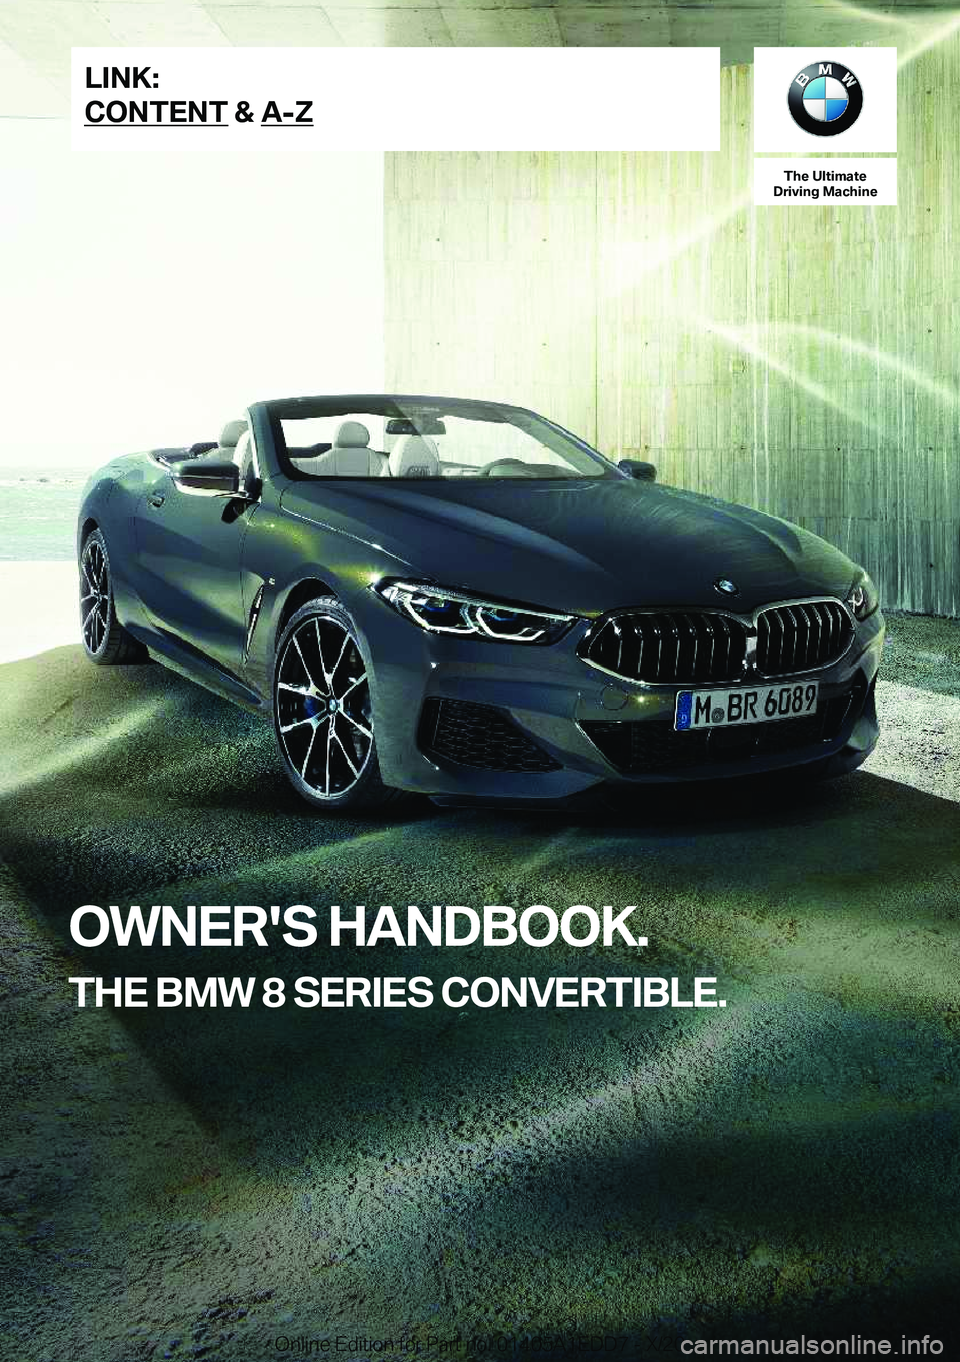 BMW 8 SERIES CONVERTIBLE 2021  Owners Manual �T�h�e��U�l�t�i�m�a�t�e
�D�r�i�v�i�n�g��M�a�c�h�i�n�e
�O�W�N�E�R�'�S��H�A�N�D�B�O�O�K�.
�T�H�E��B�M�W��8��S�E�R�I�E�S��C�O�N�V�E�R�T�I�B�L�E�.�L�I�N�K�:
�C�O�N�T�E�N�T��&��A�-�Z�O�n�l�i�n